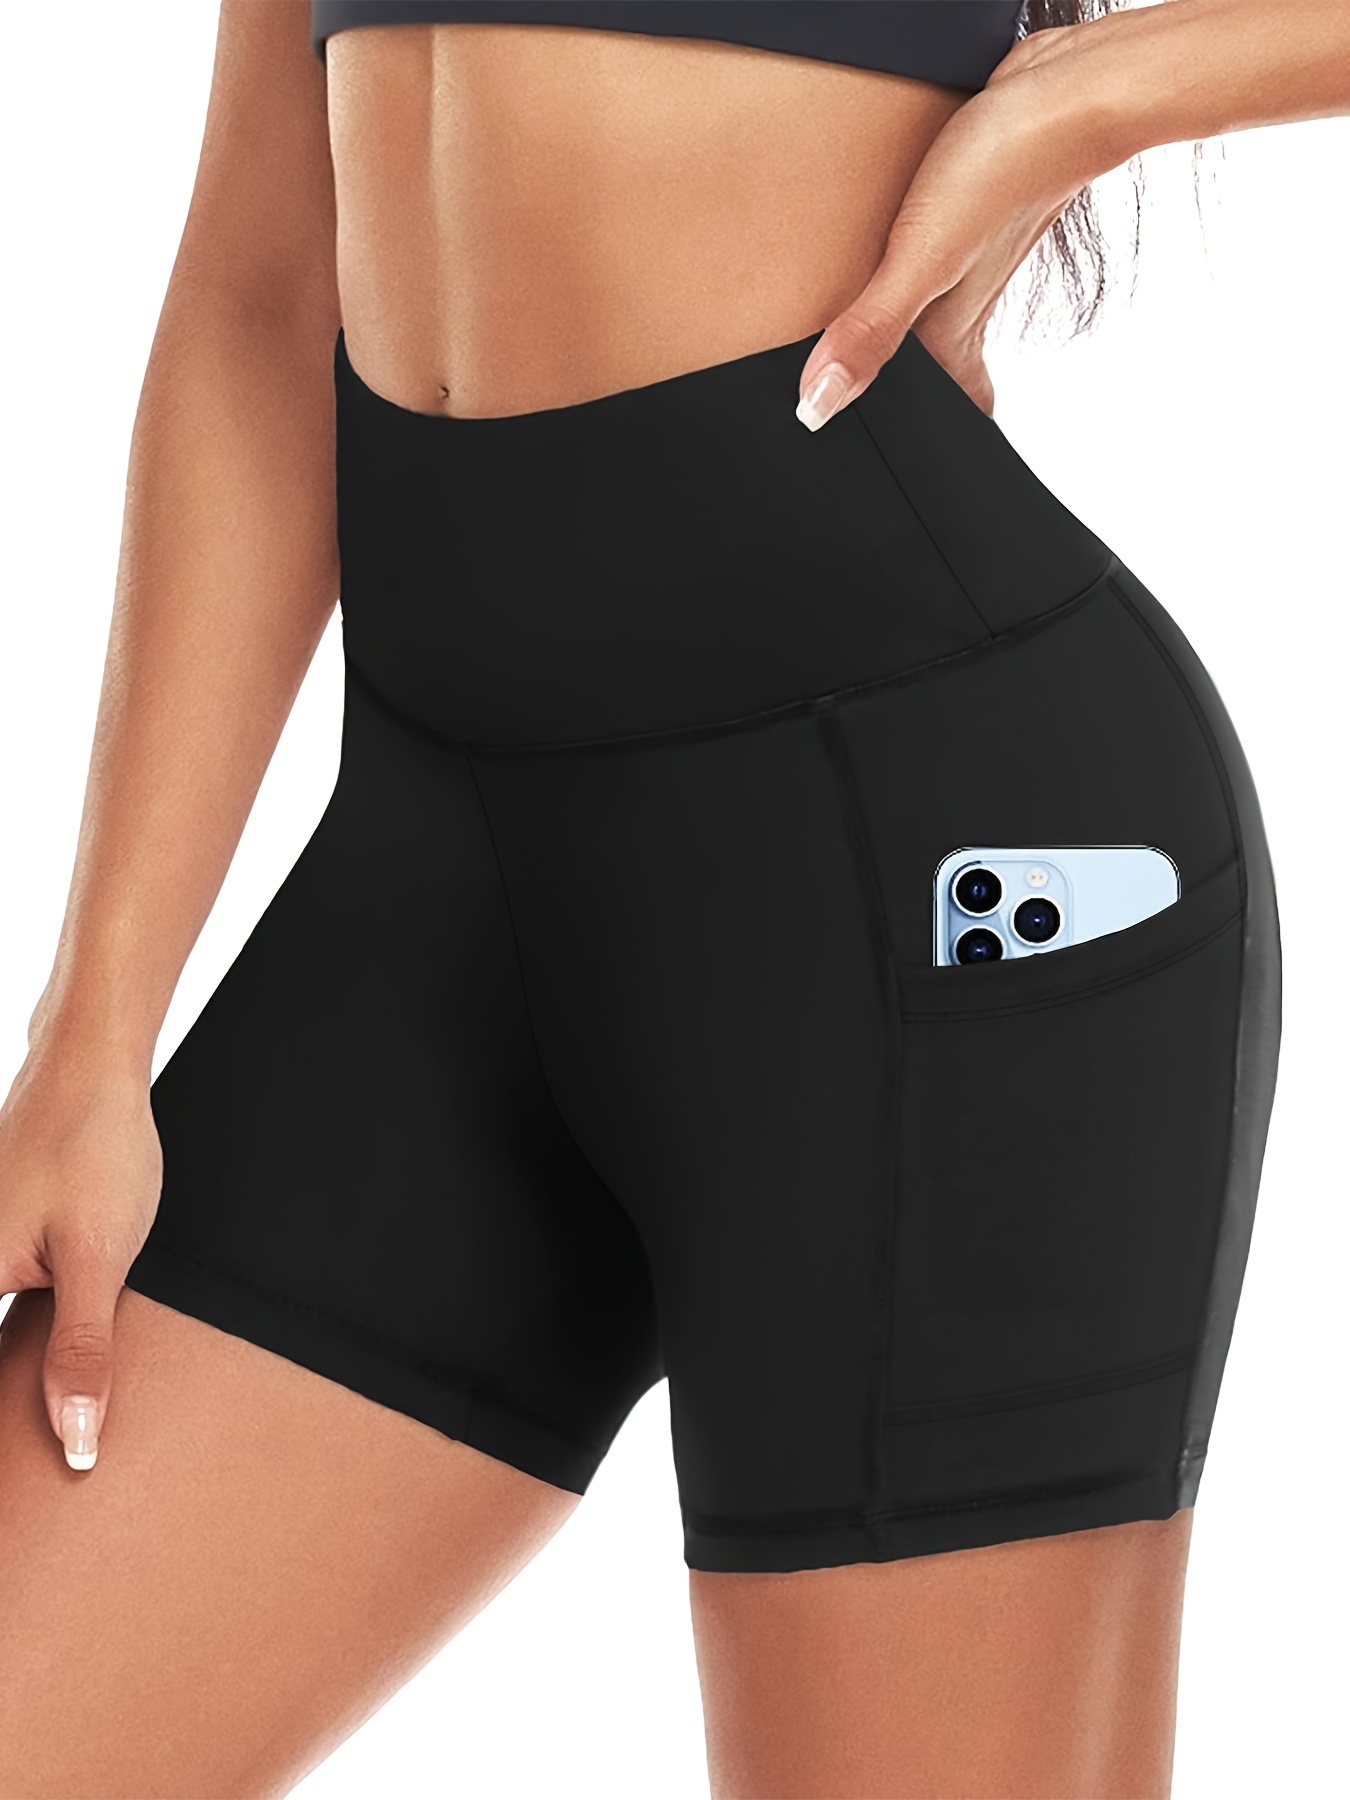 High Waisted Yoga Biker Shorts for Women with Pockets, Tummy Control  Athletic Workout Spandex Shorts